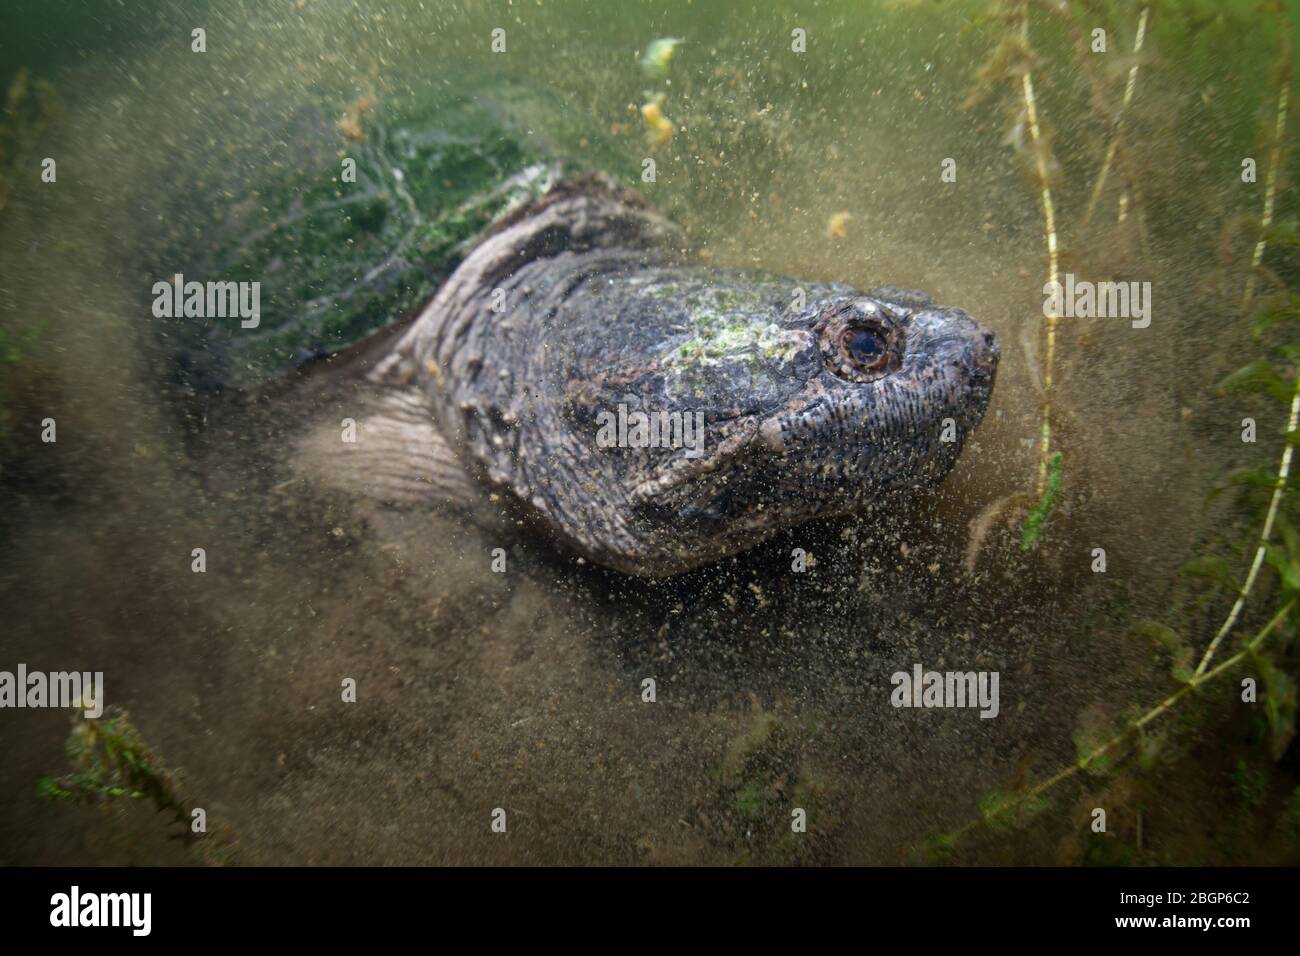 A huge Snapping turtle, Chelydra serpentina, crawls through the underwater murk and mud of a pond on Cape Cod, Massachusetts. Stock Photo